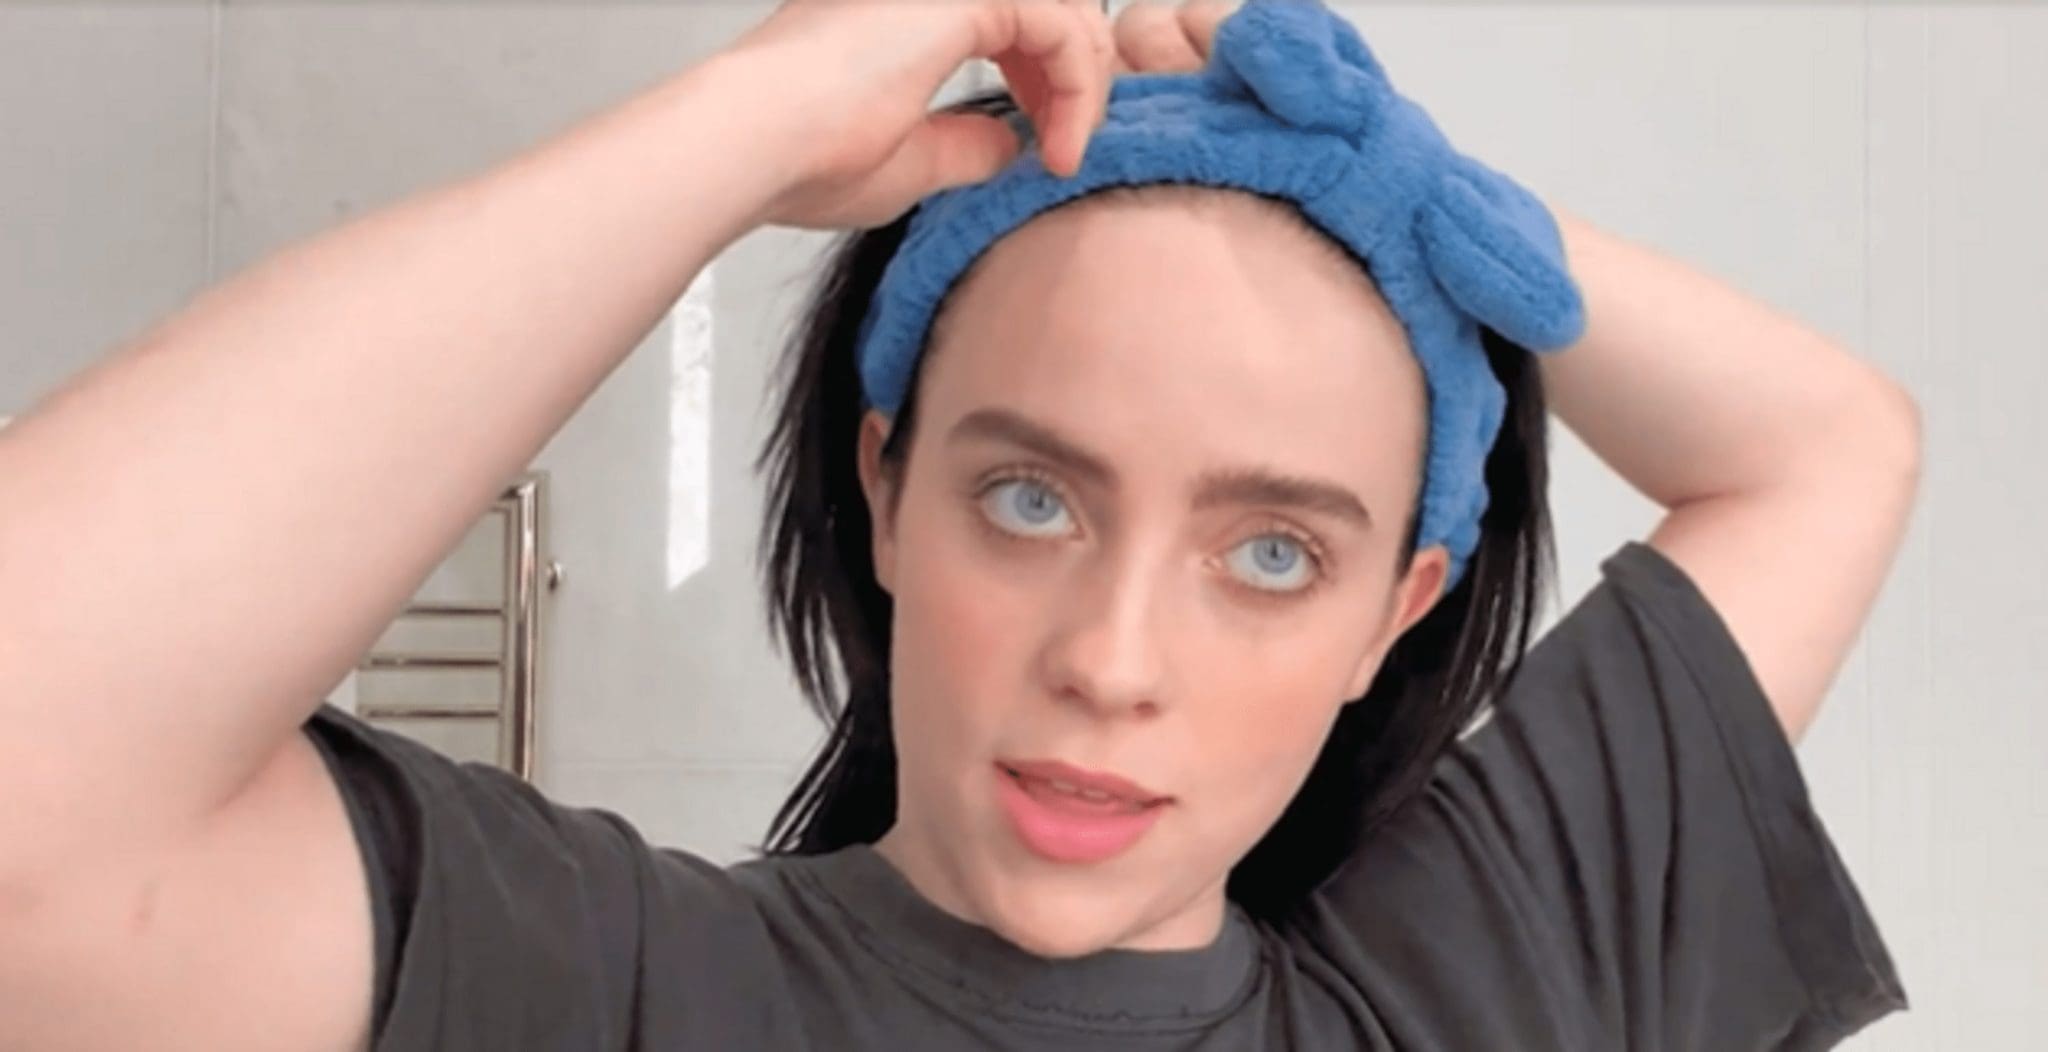 A Favorite Beauty Item Of Singer Billie Eilish Is The $5 Aquaphor All-Purpose Cream, Which Is Available In US Clinics